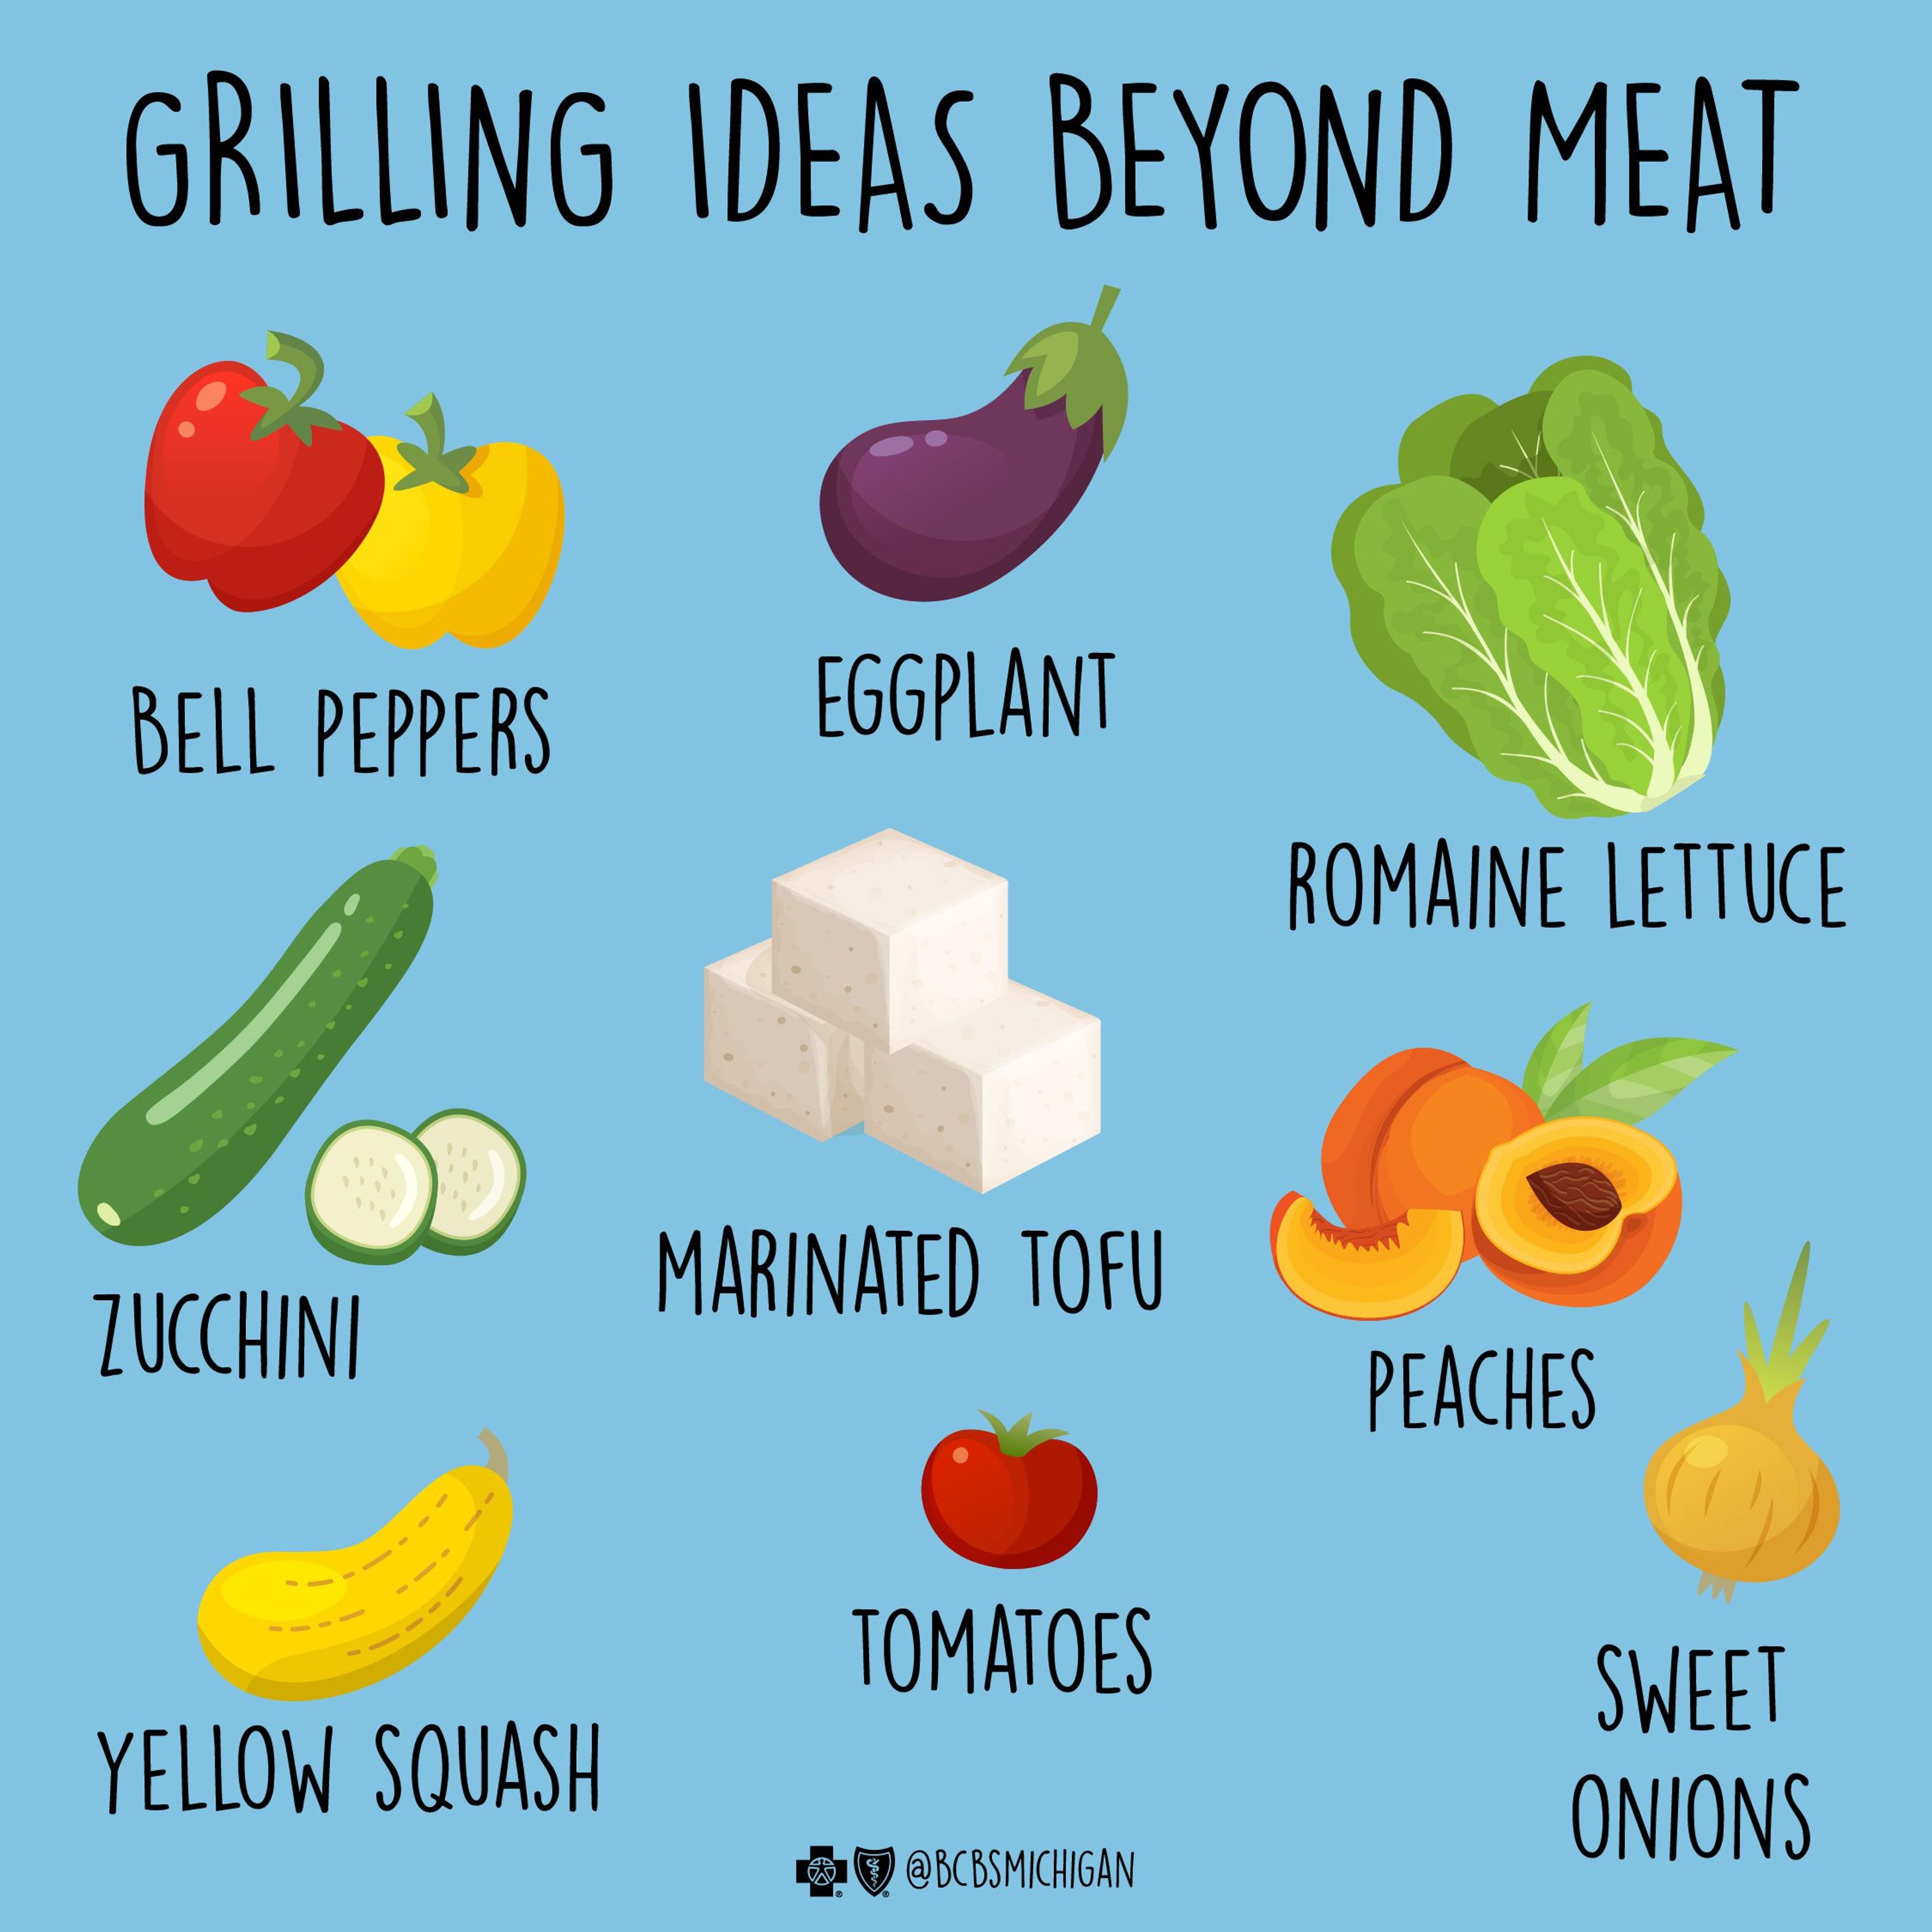 Grilling Ideas Beyond Meat